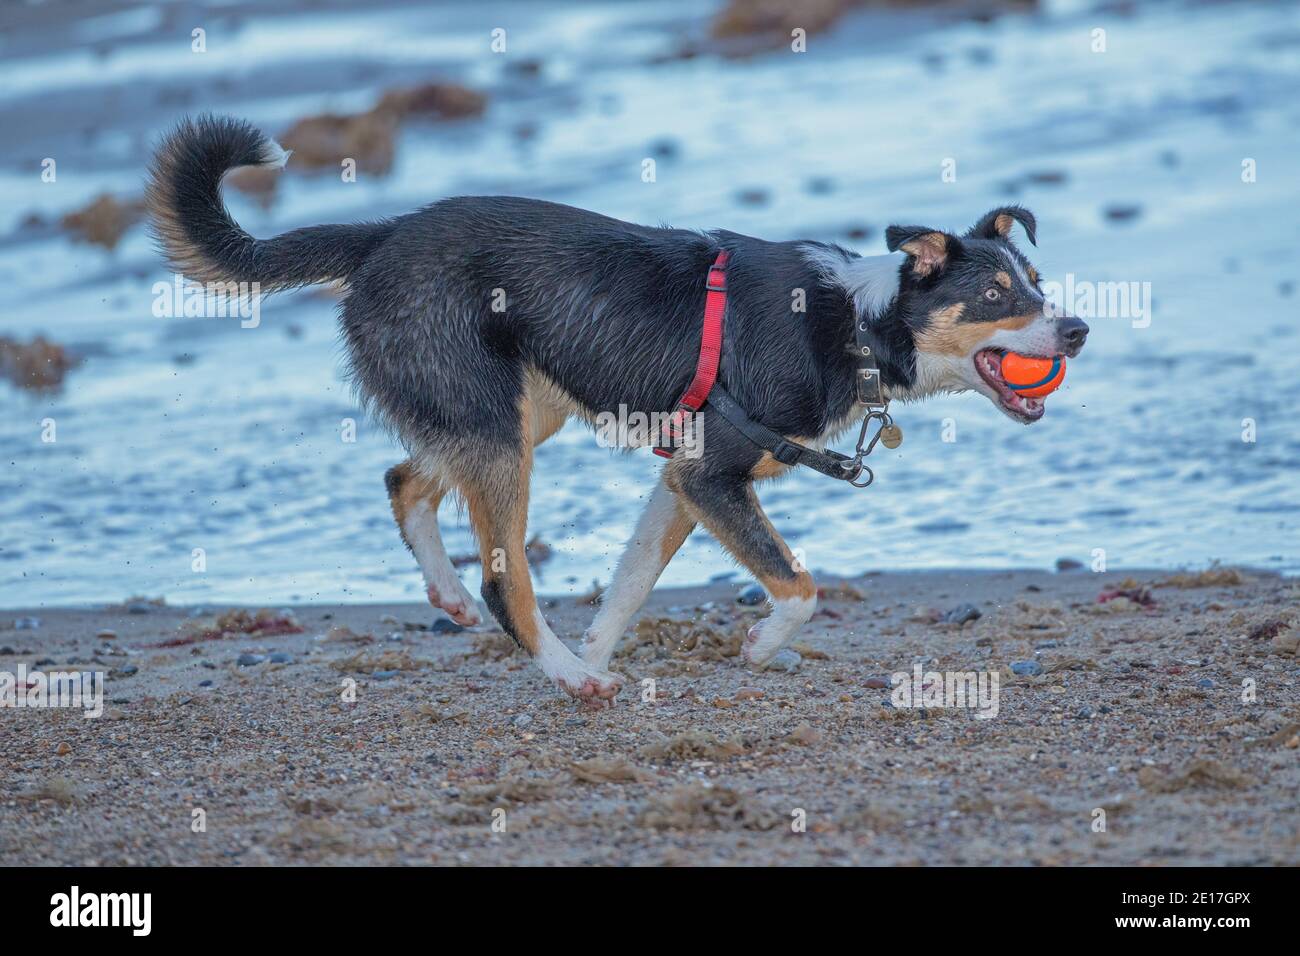 Tri-coloured Border Collie Dog (Canis familiaris). Domestic animal, pet, companion, shepherding breed. Fetching, carrying ball in mouth. Sea side. Stock Photo